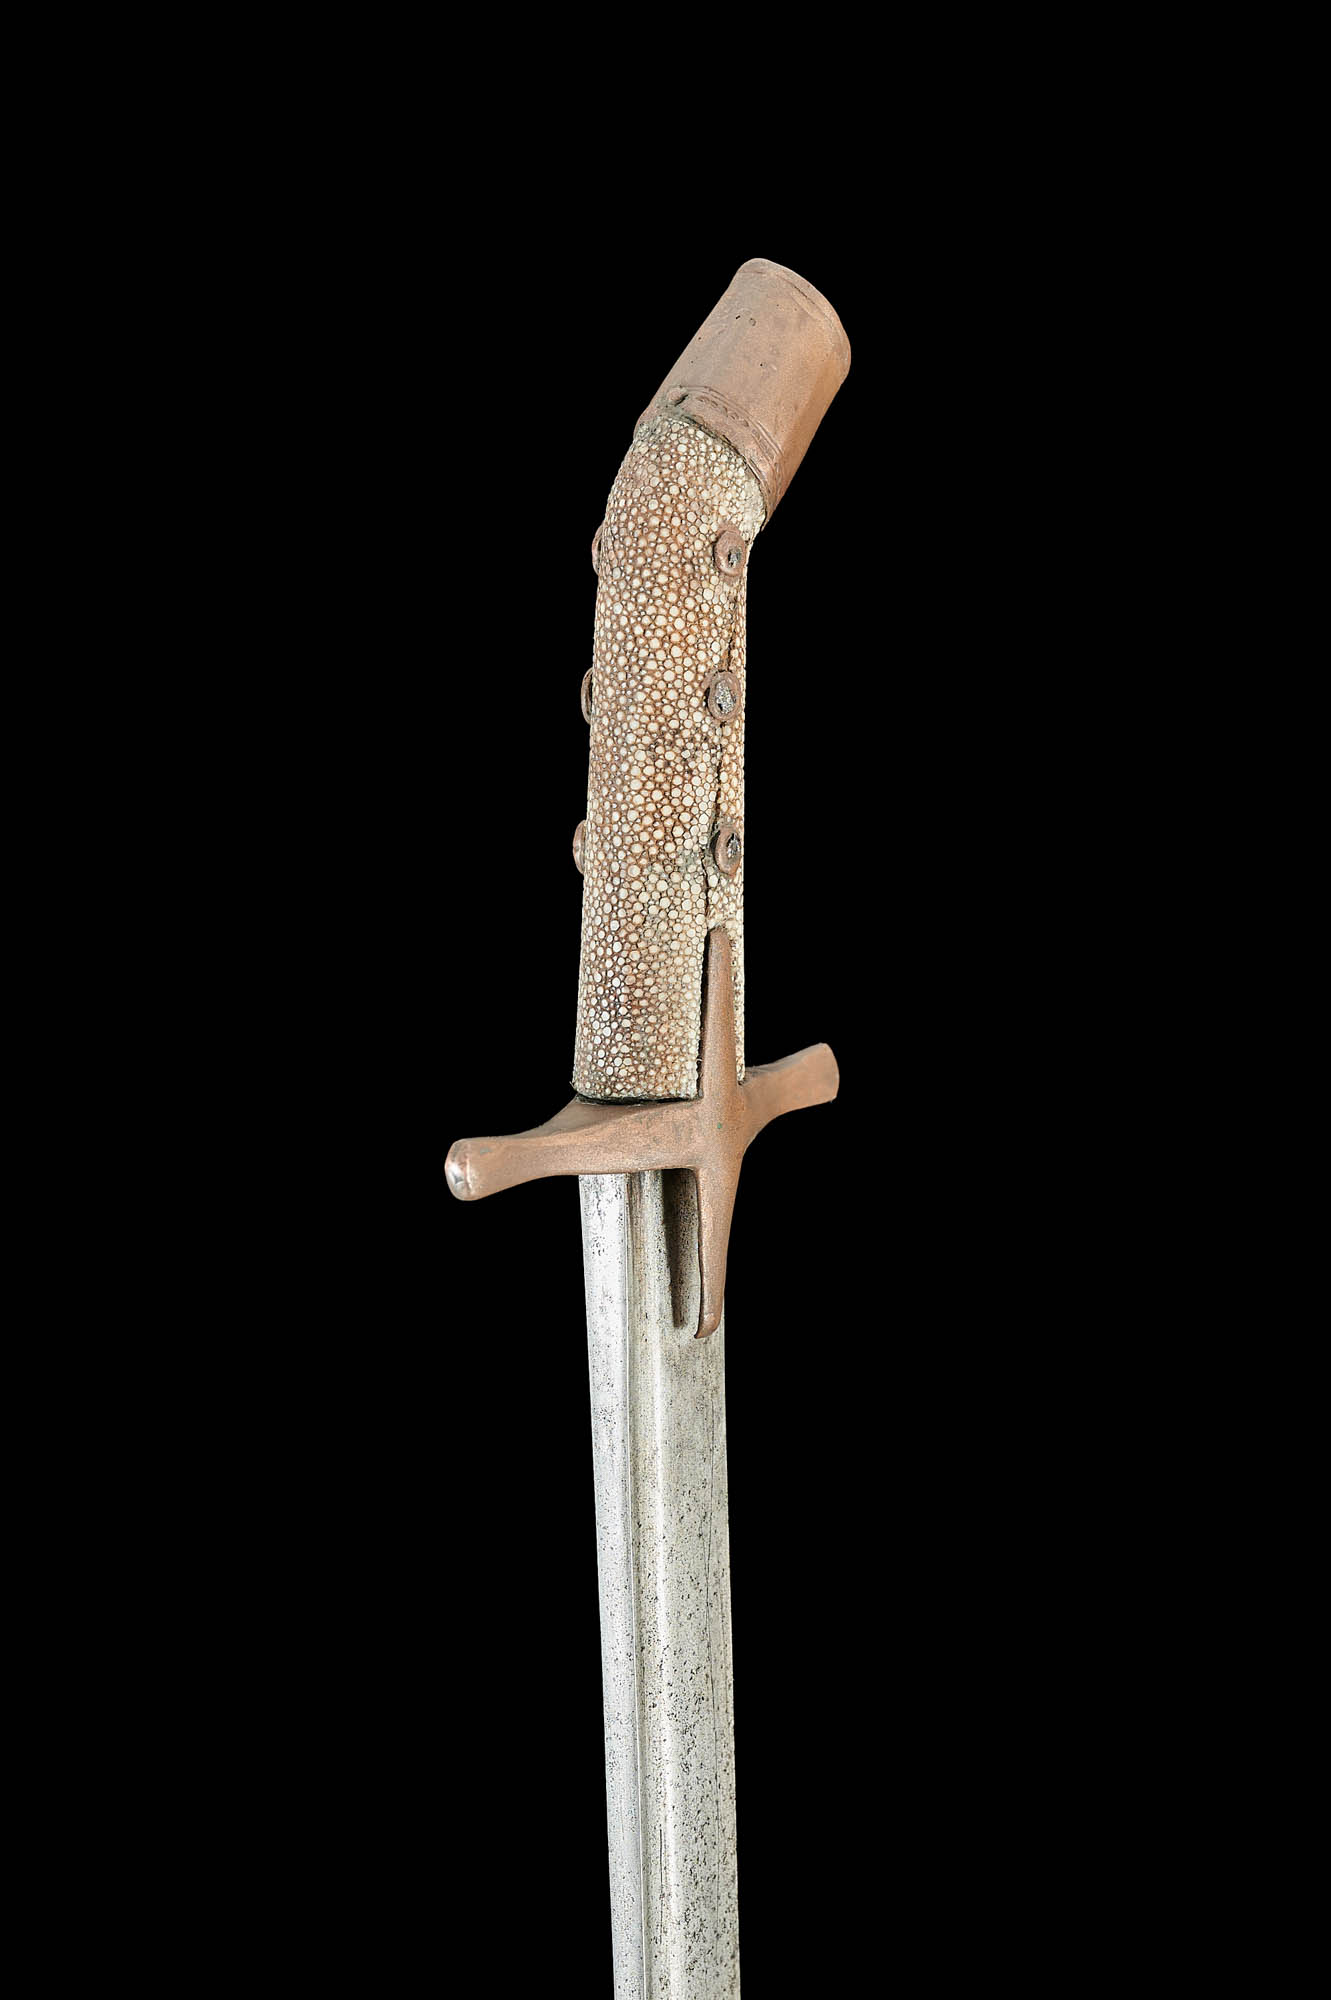 TATAR SABER SWORD DECORATED WITH RHOMBS - Image 19 of 21